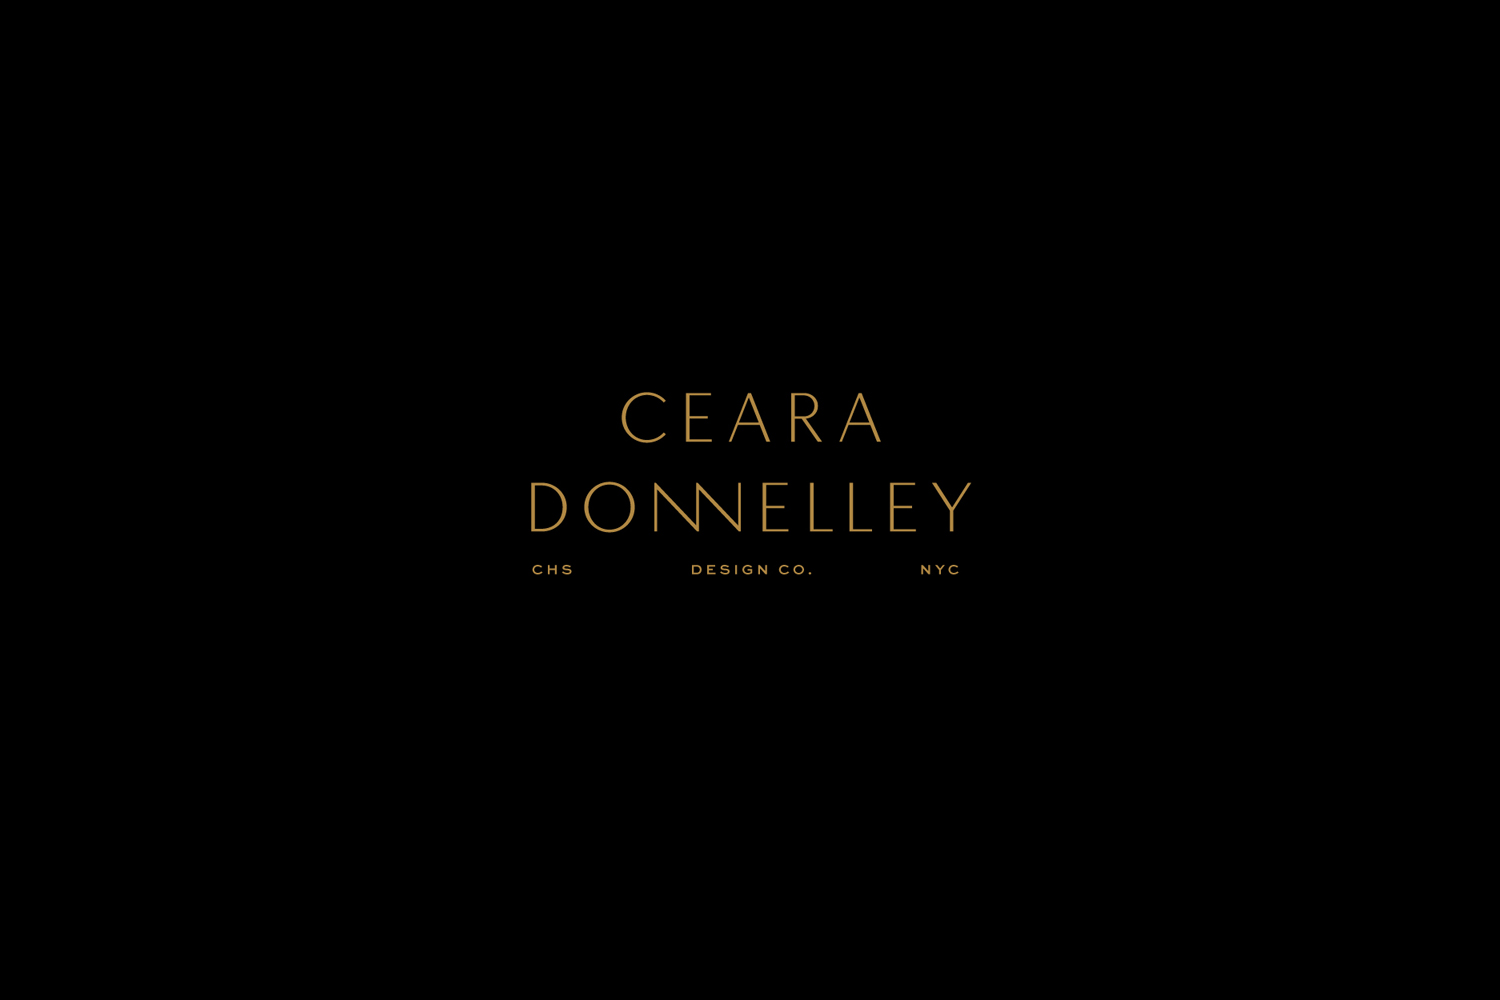 Ceara Donnelley | SDCO Partners